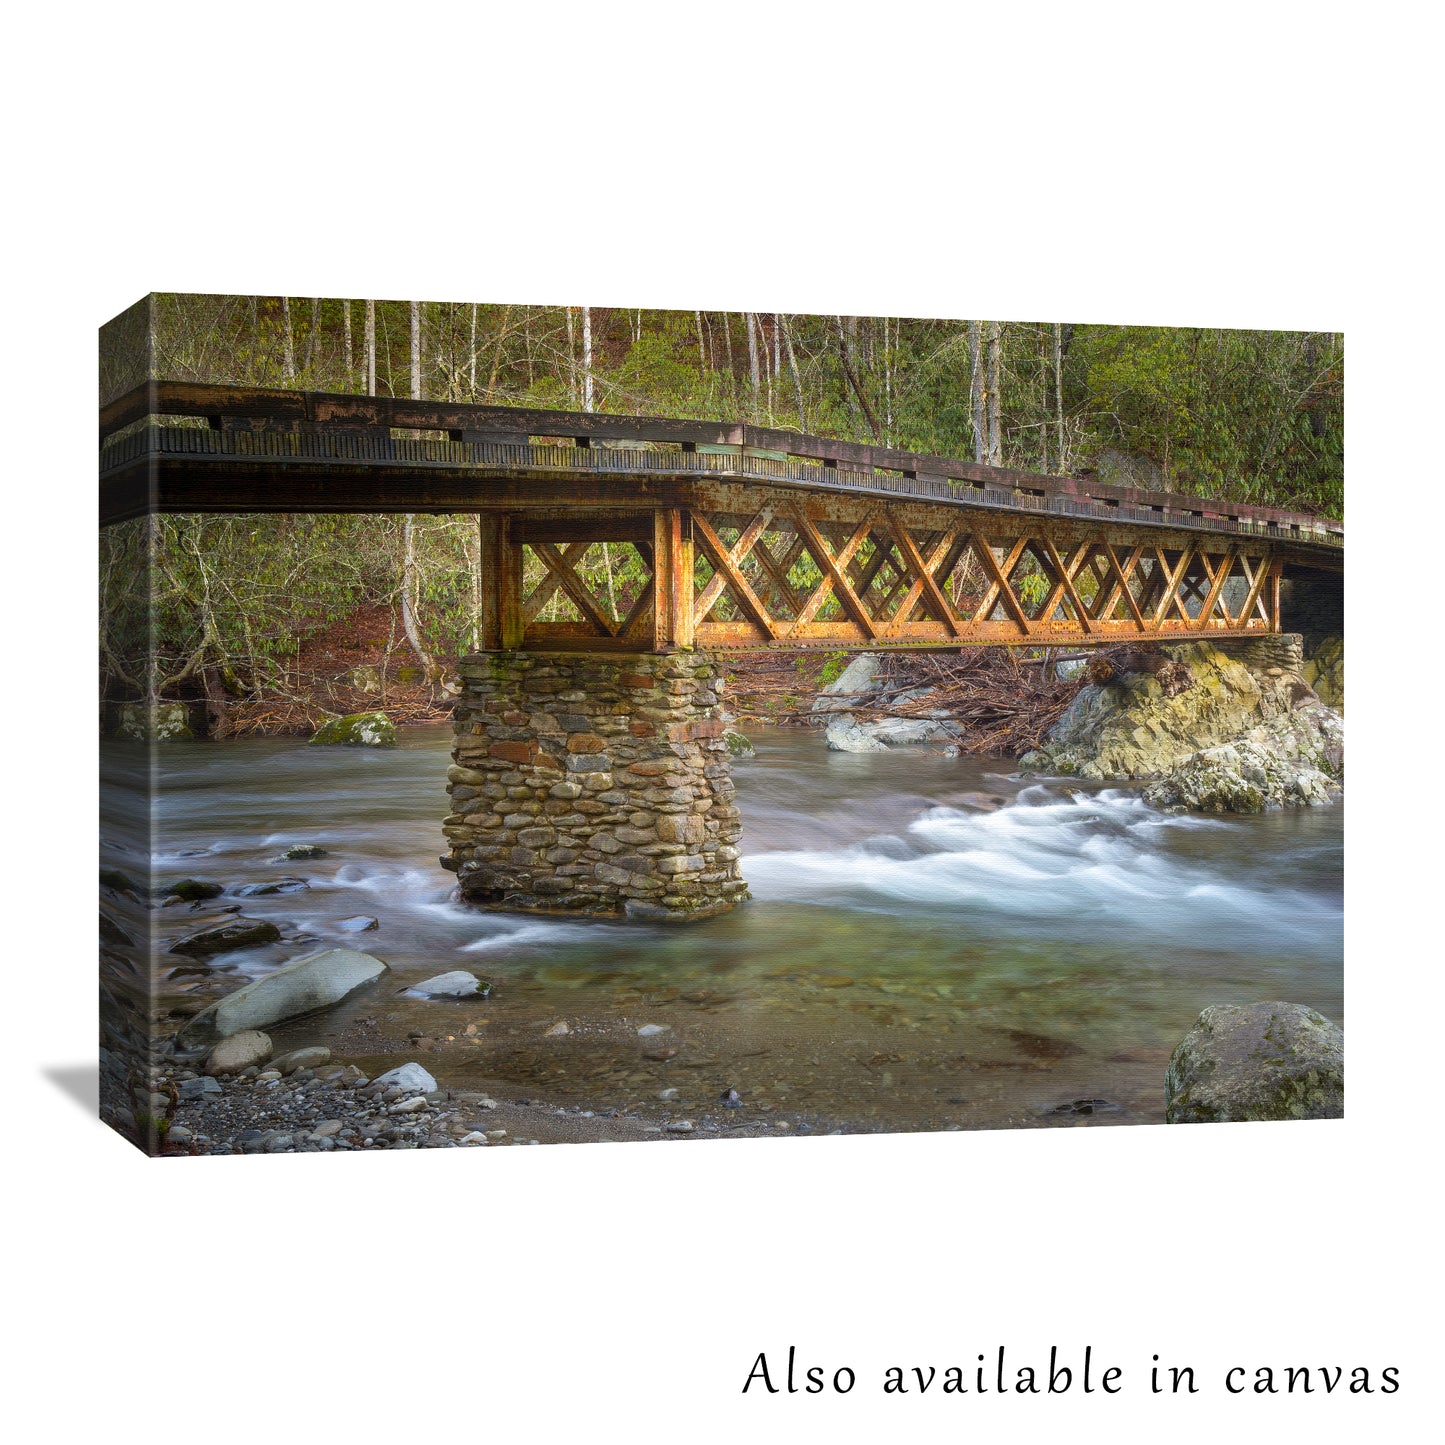 The photograph is beautifully presented on a gallery-wrapped canvas, showing this bridge photograph is also available as a canvas print for those interested in a ready-to-hang solution.